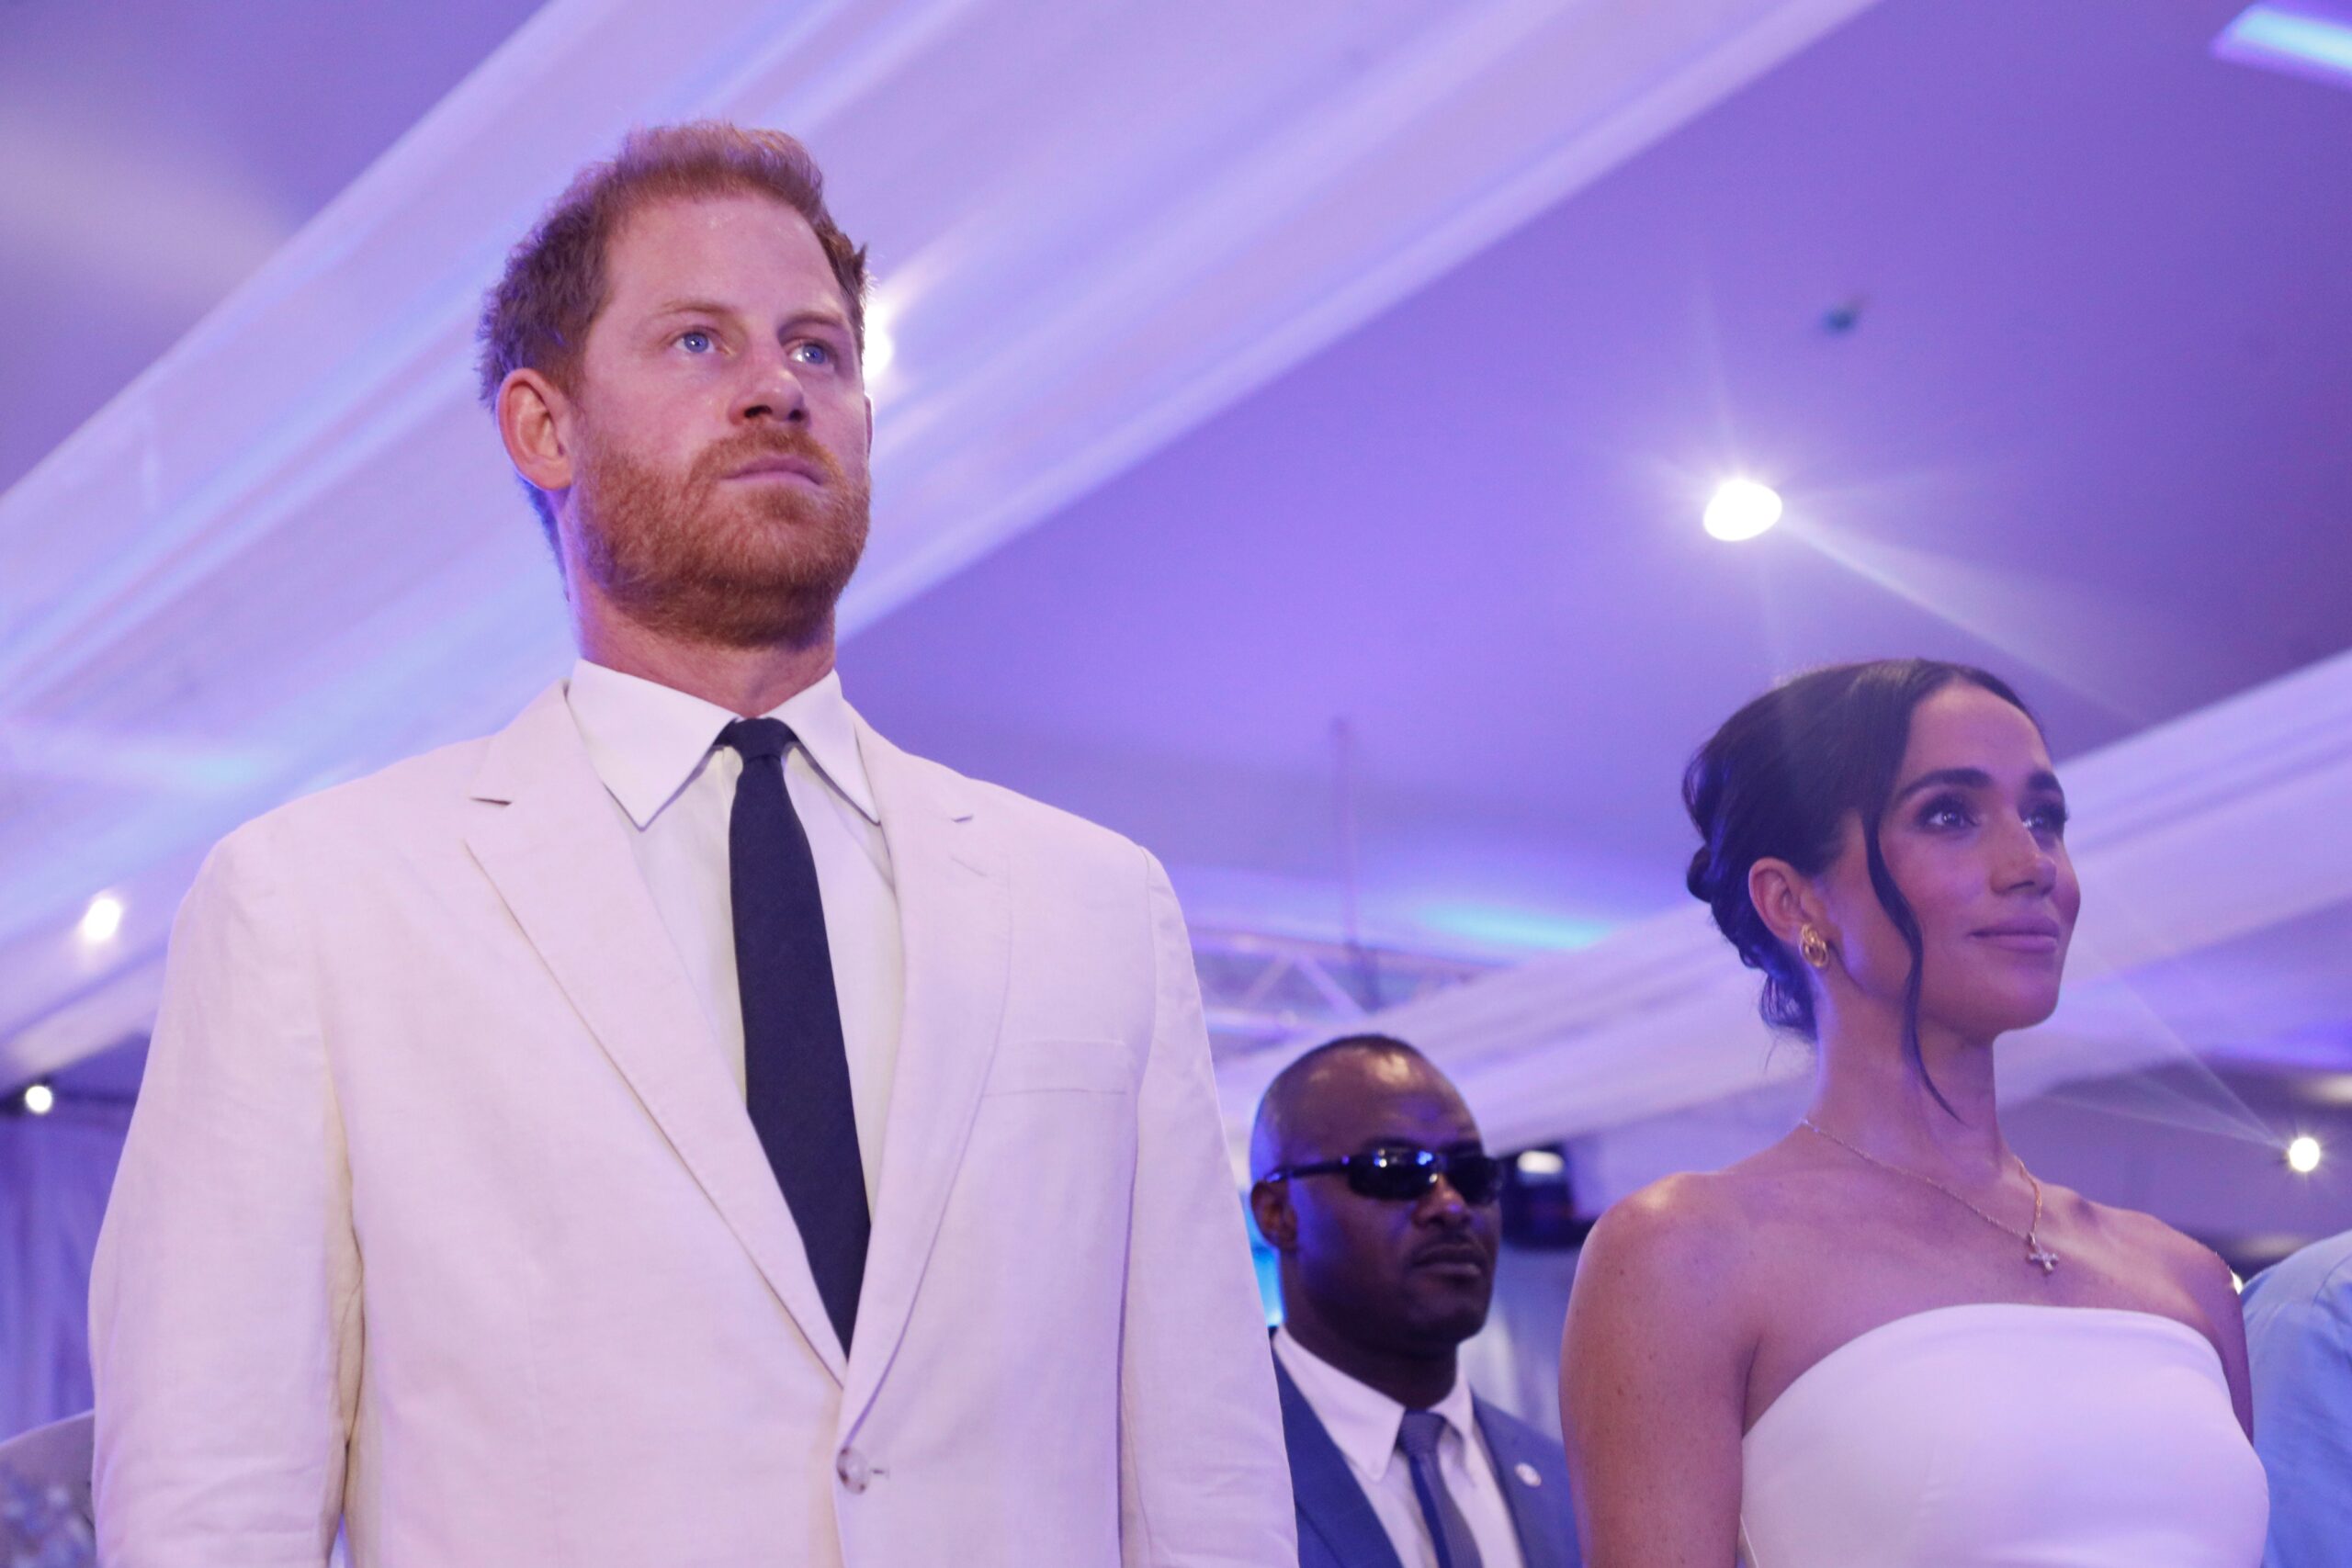 Photo of Meghan Markle and Prince Harry One day of a Pivotal Historic Moment Chosen for Main Honor